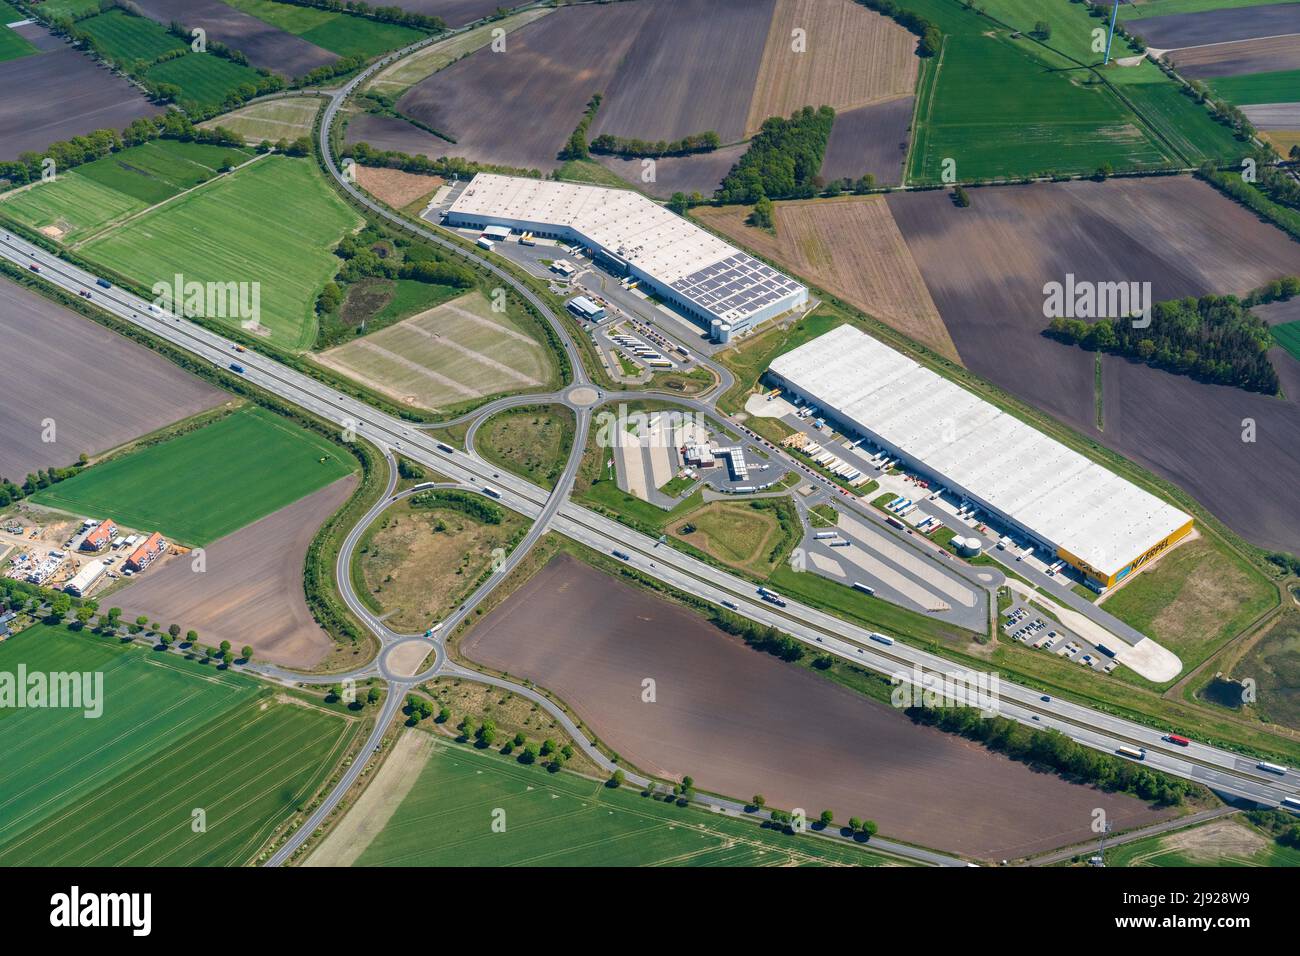 Aerial view of logistics halls on the A1 motorway, Elsdorf exit, transport links, Lower Saxony, Germany Stock Photo